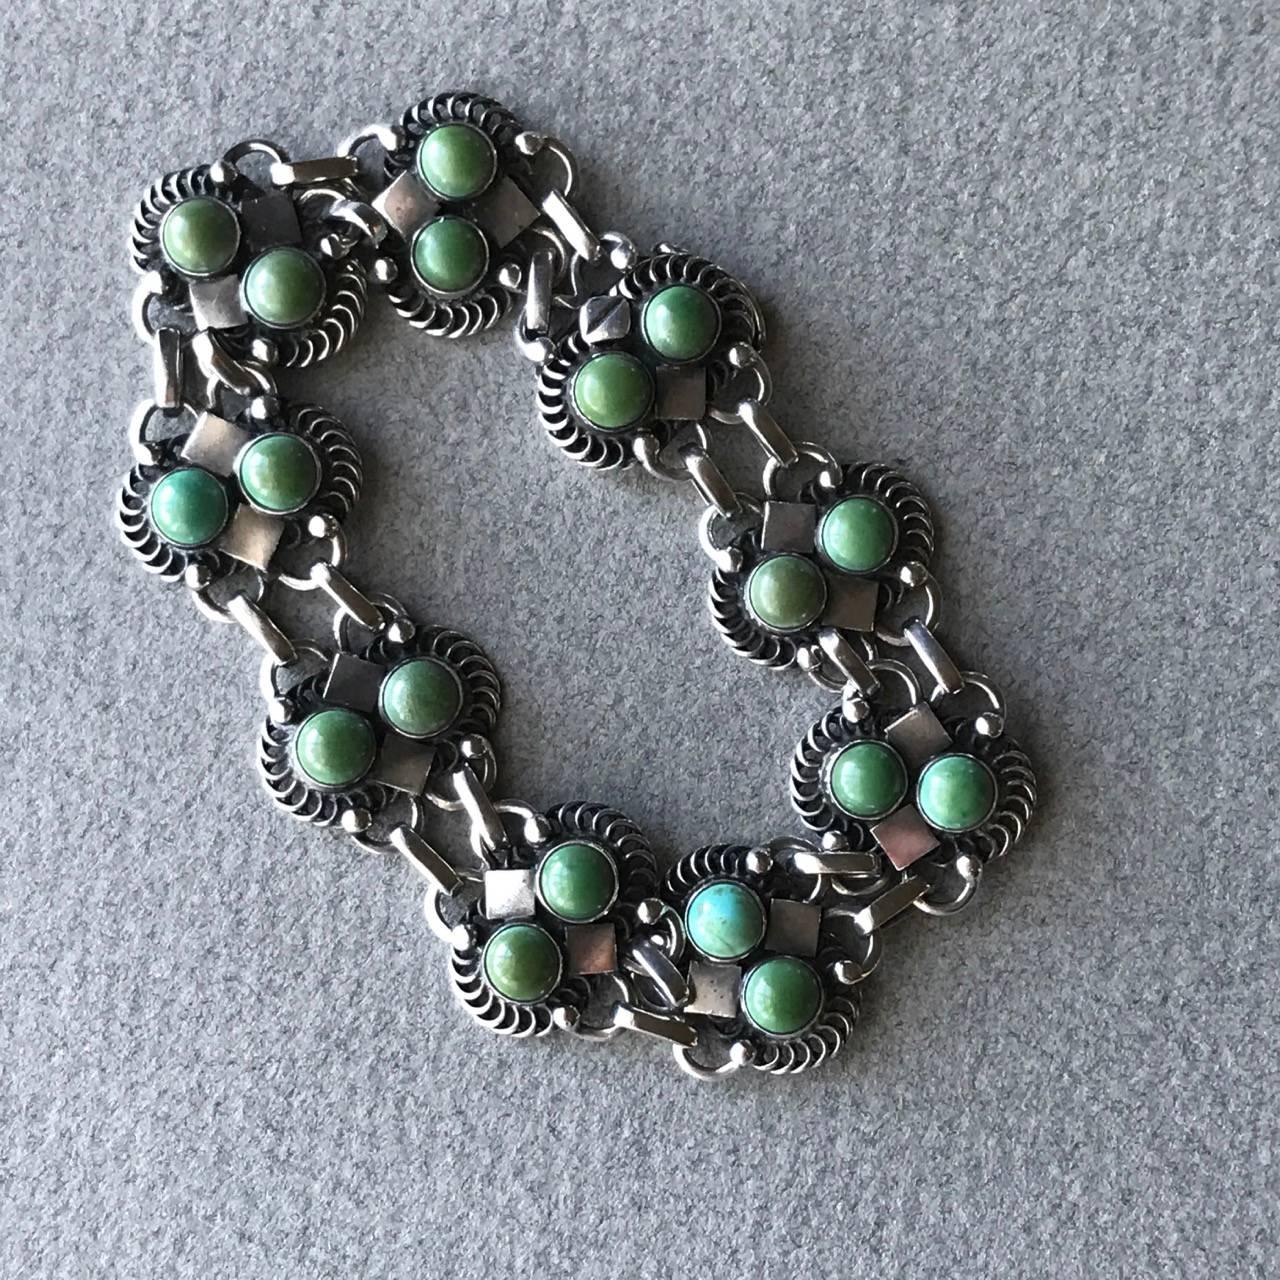 Georg Jensen Sterling Silver Bracelet No 8 with Turquoise cabochon stones, Very Rare.

Beautifully articulated with fine details in a classic art deco style.

Excellent condition. 

Hallmarks from 1933-44.

Complimentary gift box and FREE shipping